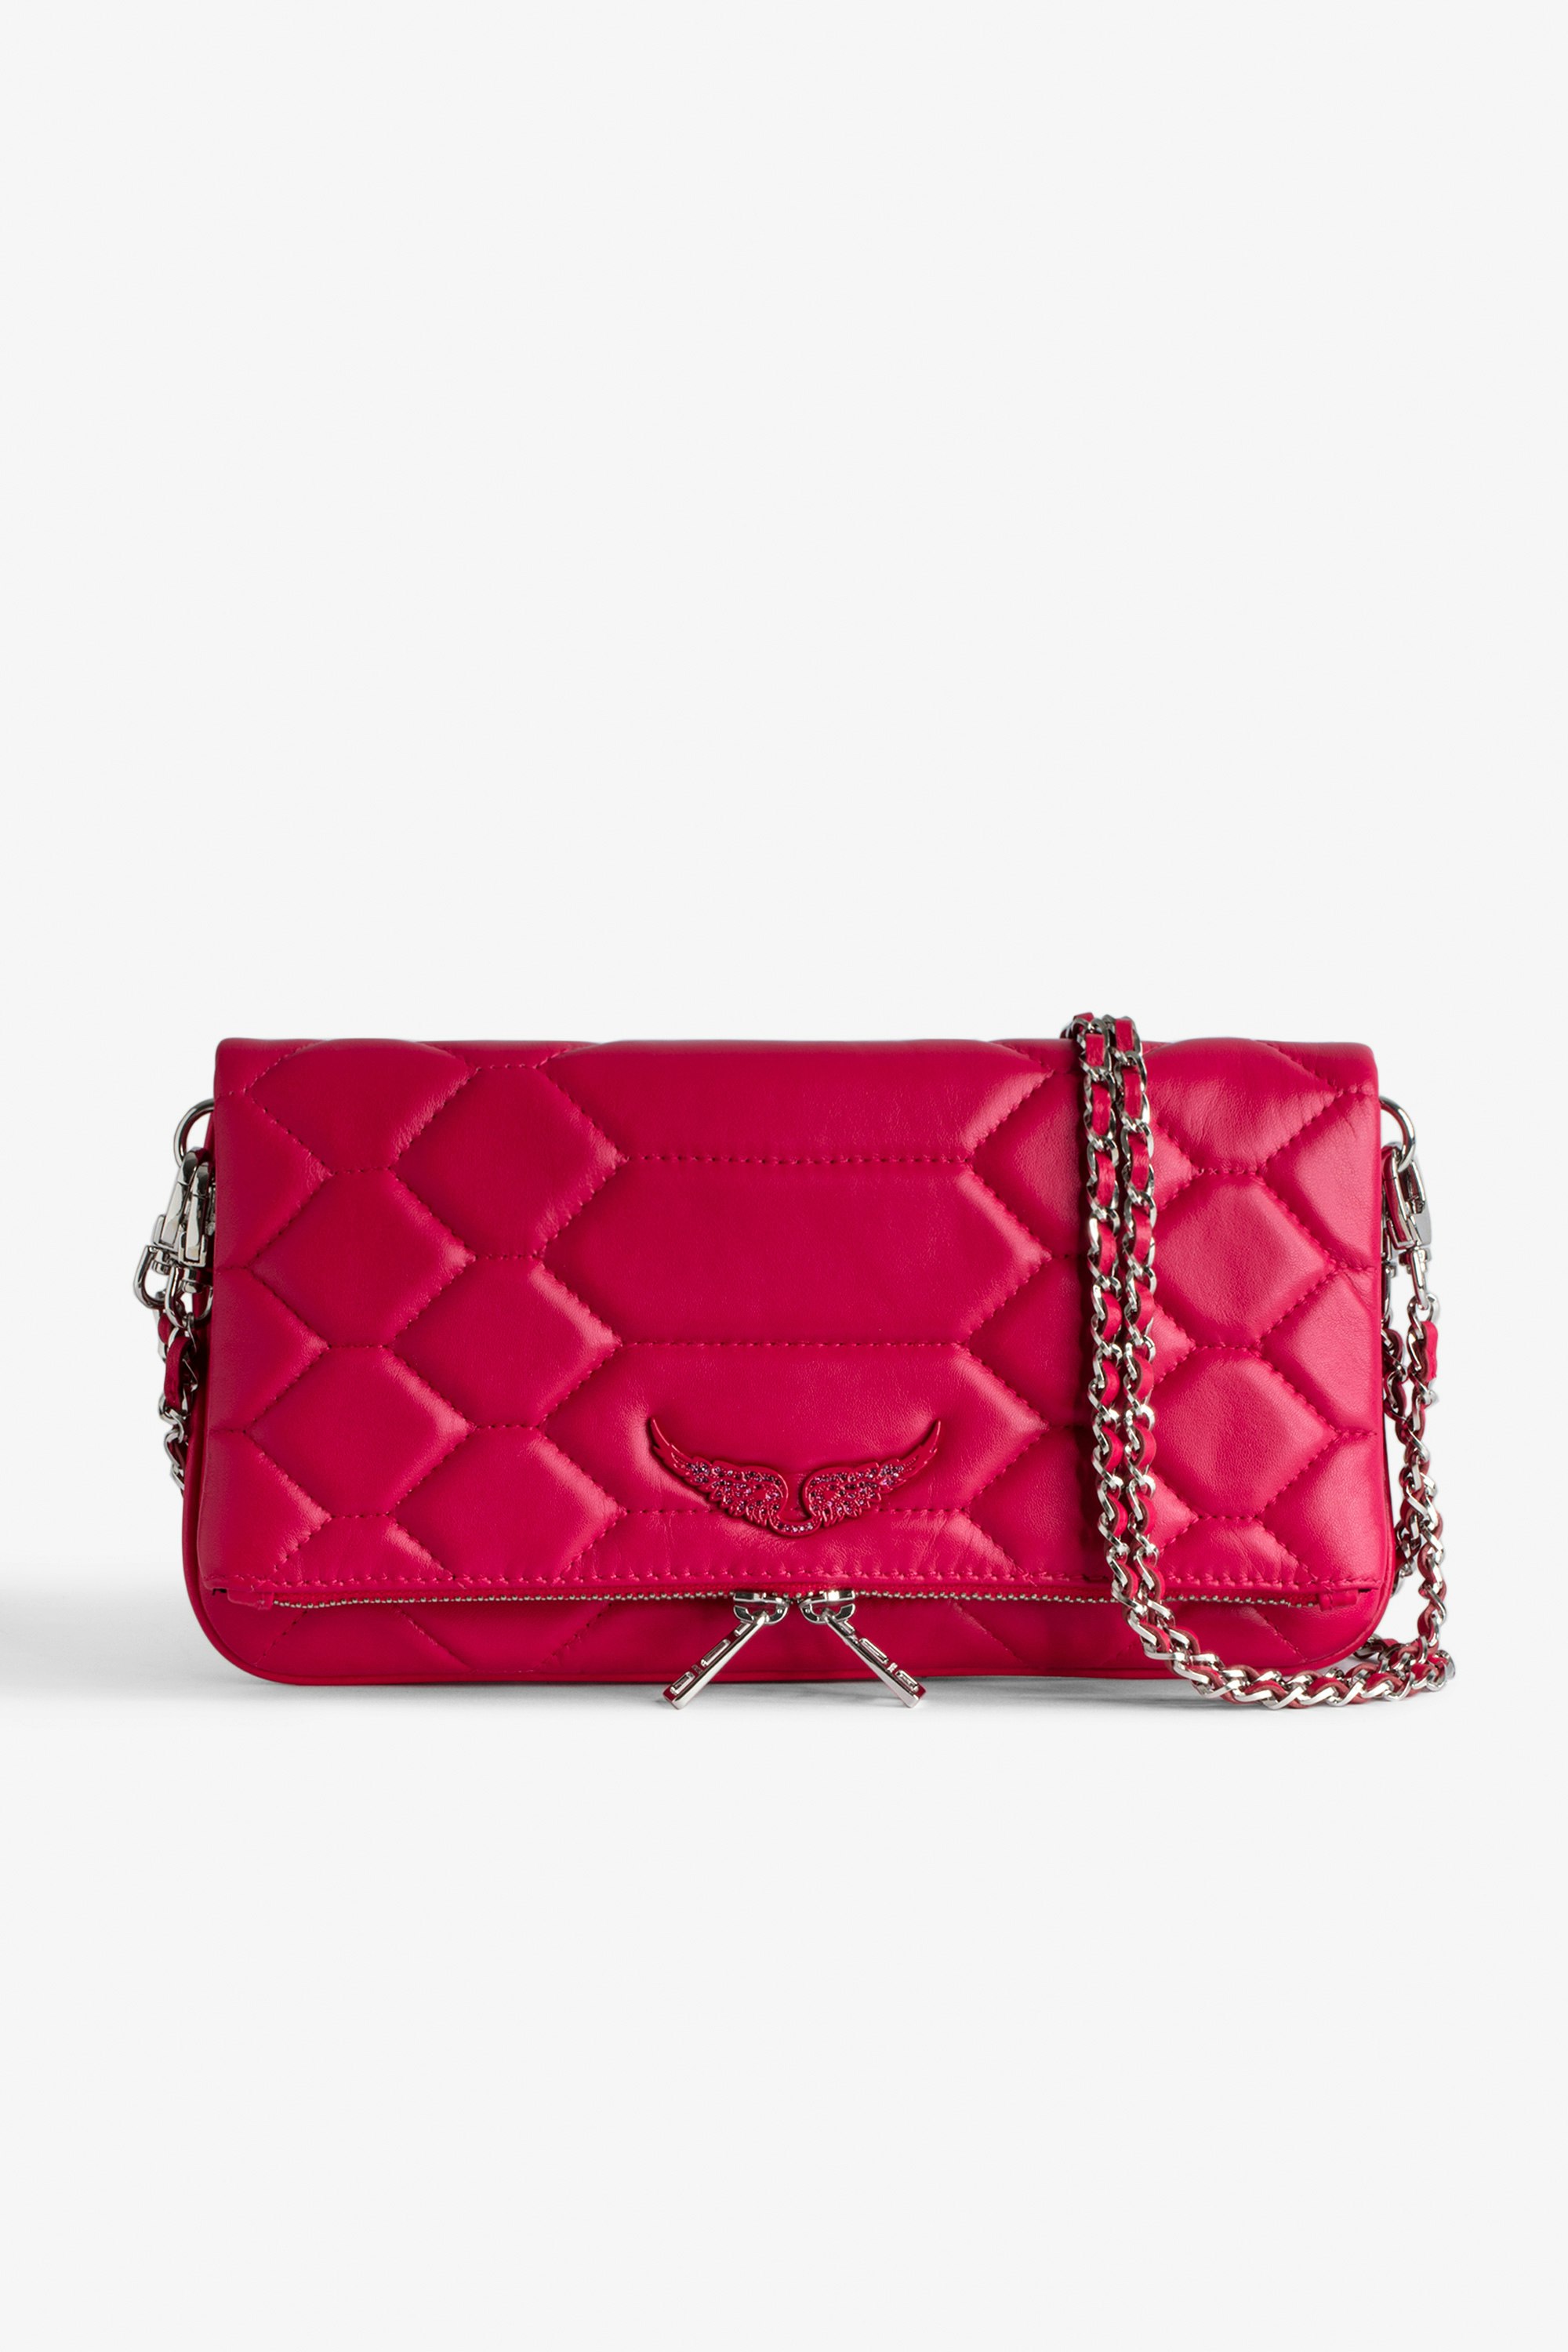 Rock Quilted Clutch - Women’s pink python-effect quilted leather clutch with wings charm